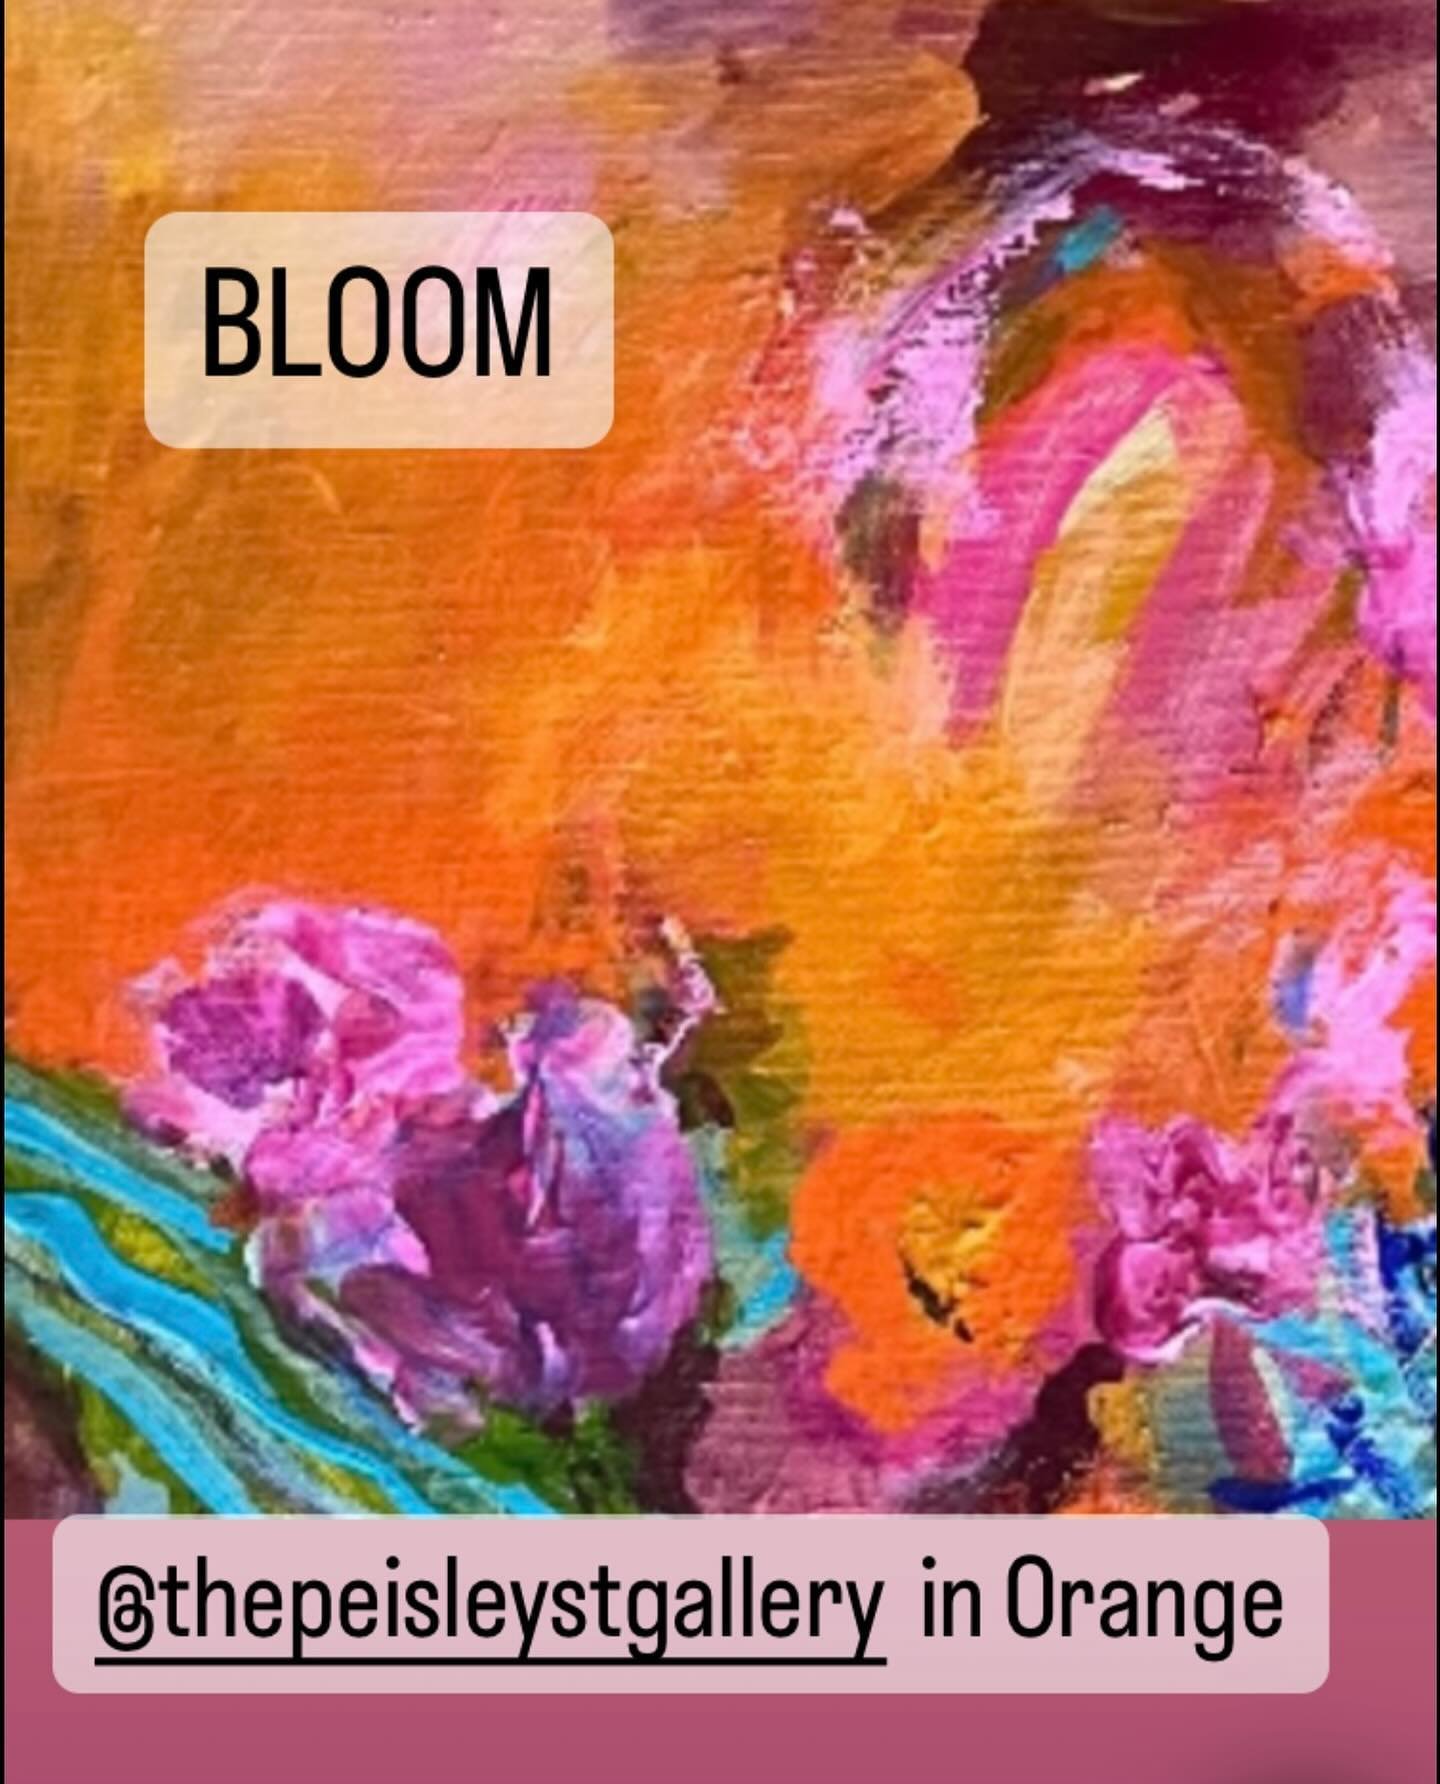 A TASTE of some of my work in BLOOM @thepeisleystgallery &hellip;starts Monday 29th April&hellip;opening night is Thursday 2nd May @ 6 pm&hellip;all welcome&hellip;inspired by my recent travels in Mexico&hellip;a full explosion of colour!!!
There wil